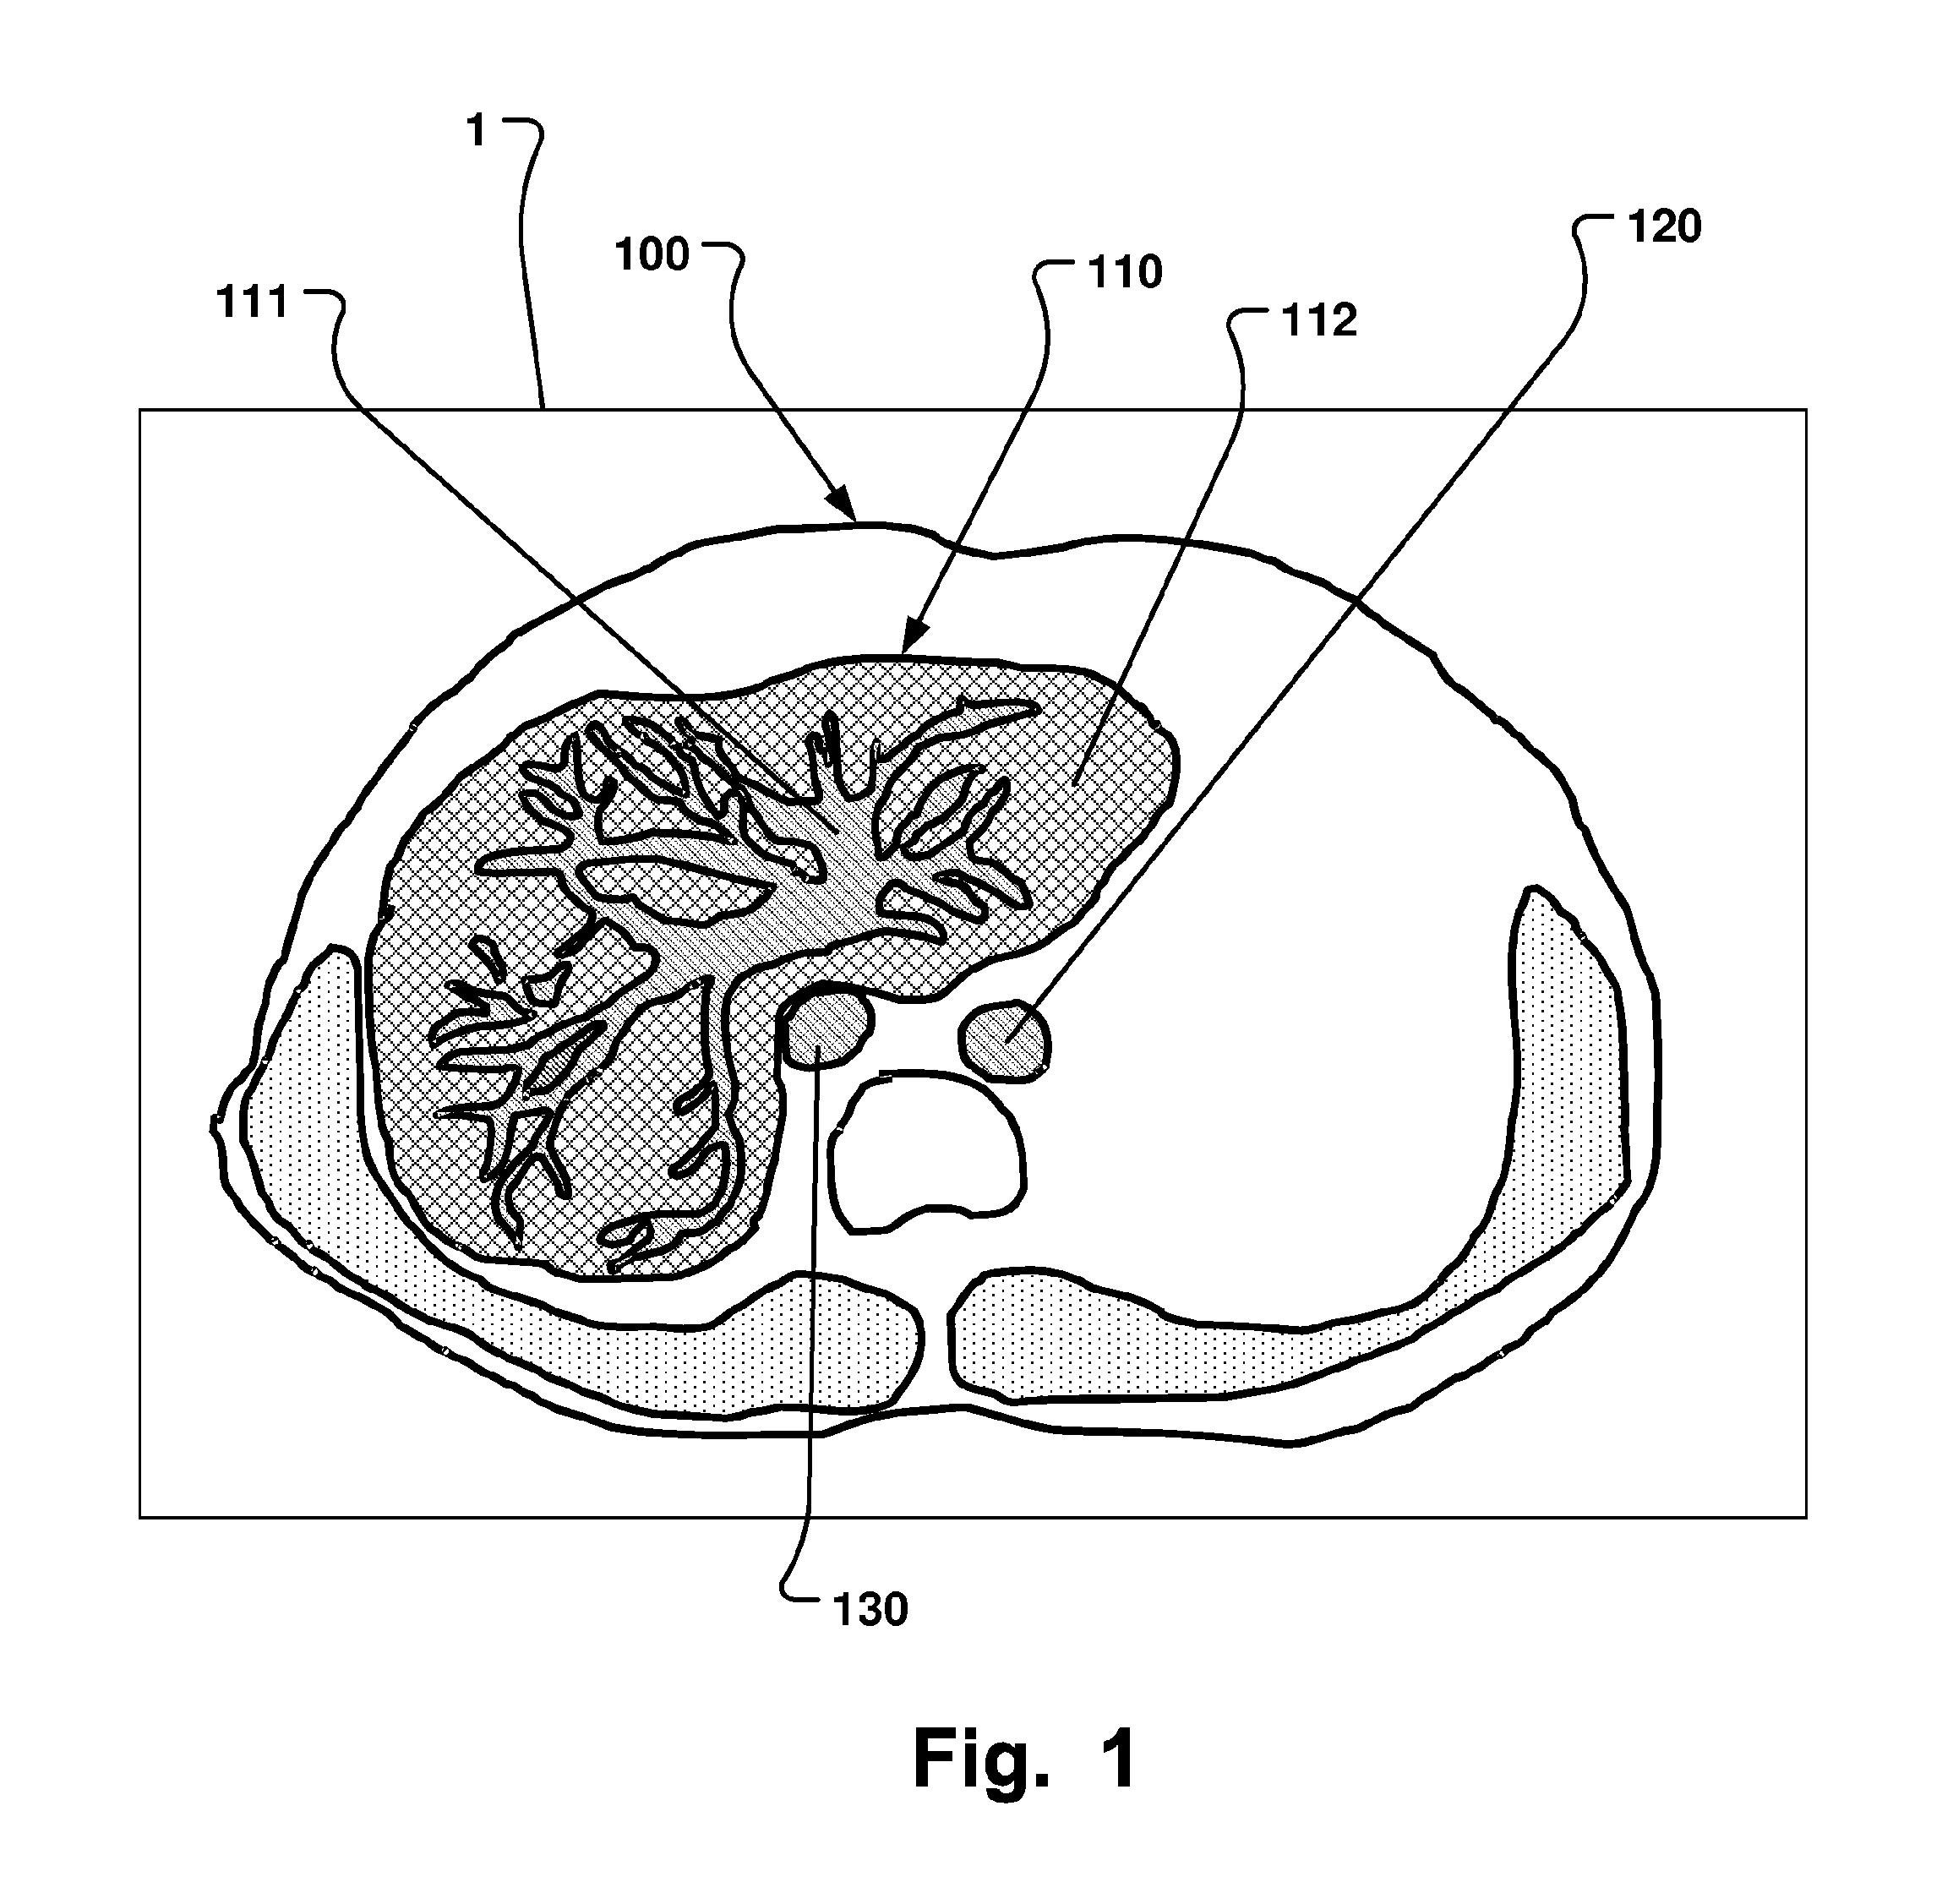 Computer-Based Method And System For Imaging-Based Dynamic Function Evaluation Of An Organ